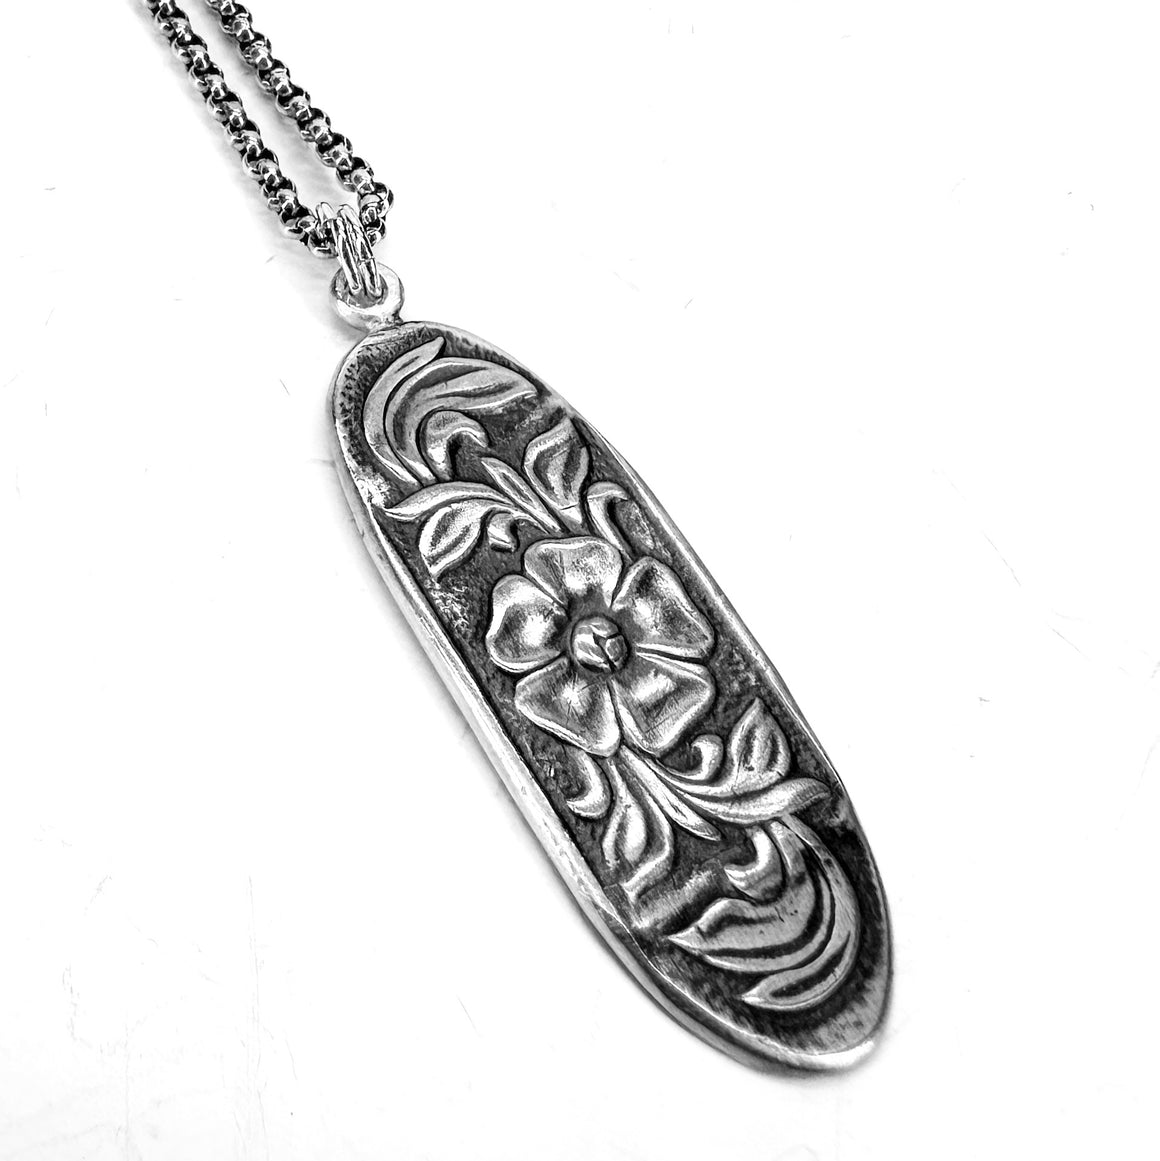 Long Silver Pendant With Flowers Necklace